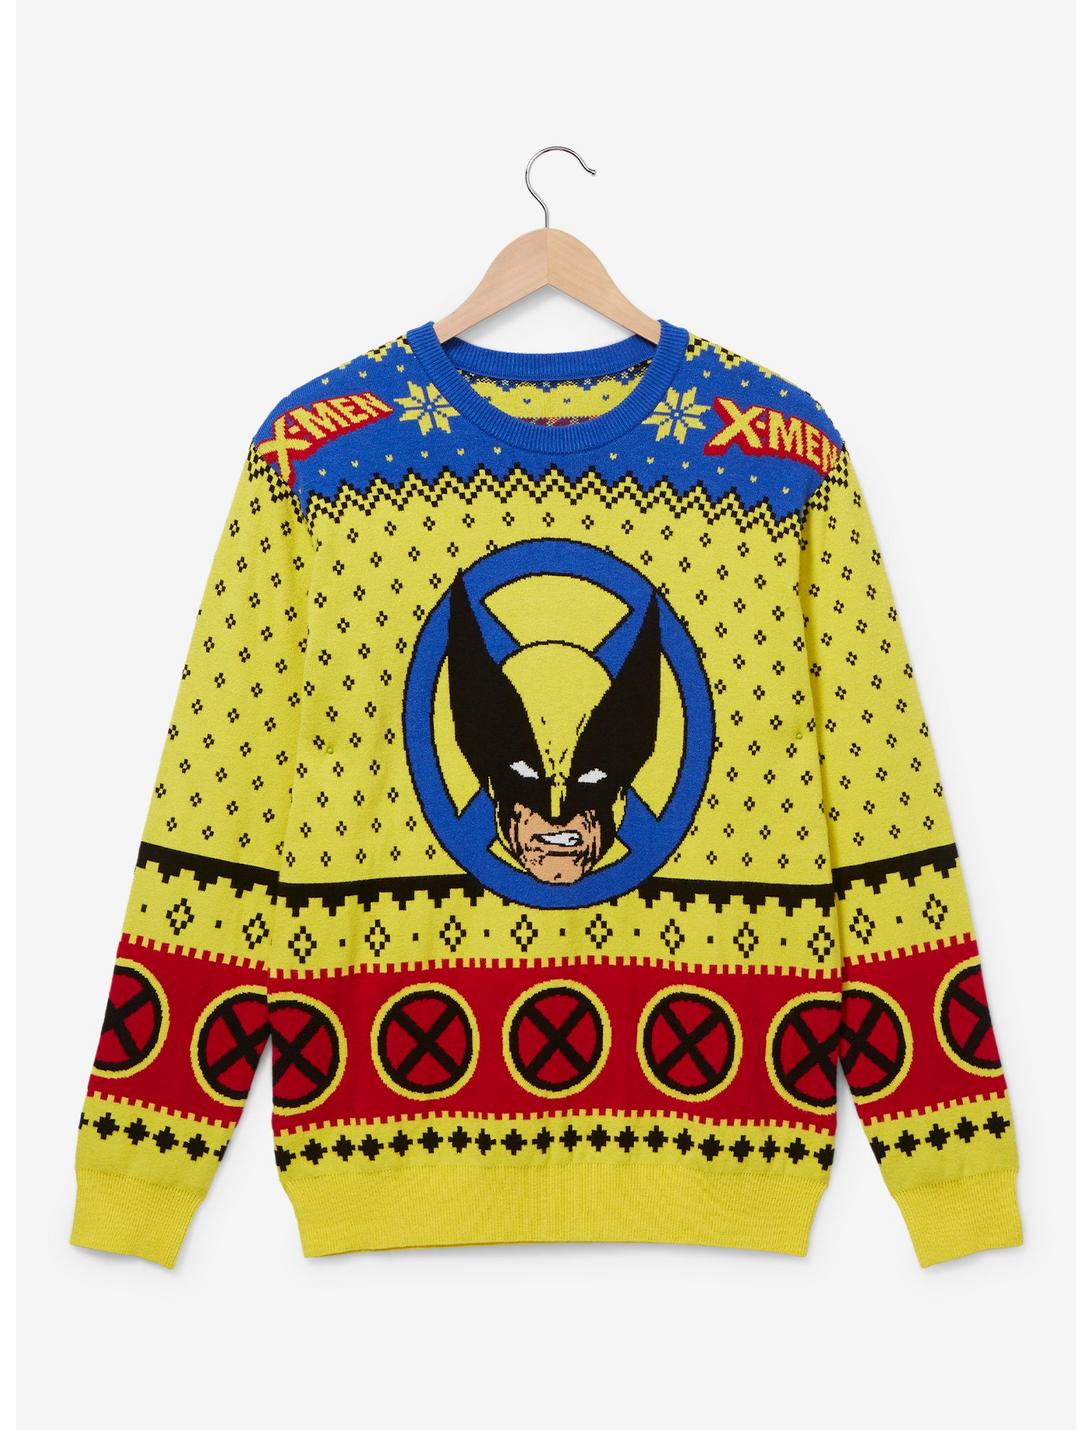 X-Men Wolverine Holiday Sweater - BoxLunch Exclusive, YELLOW, hi-res